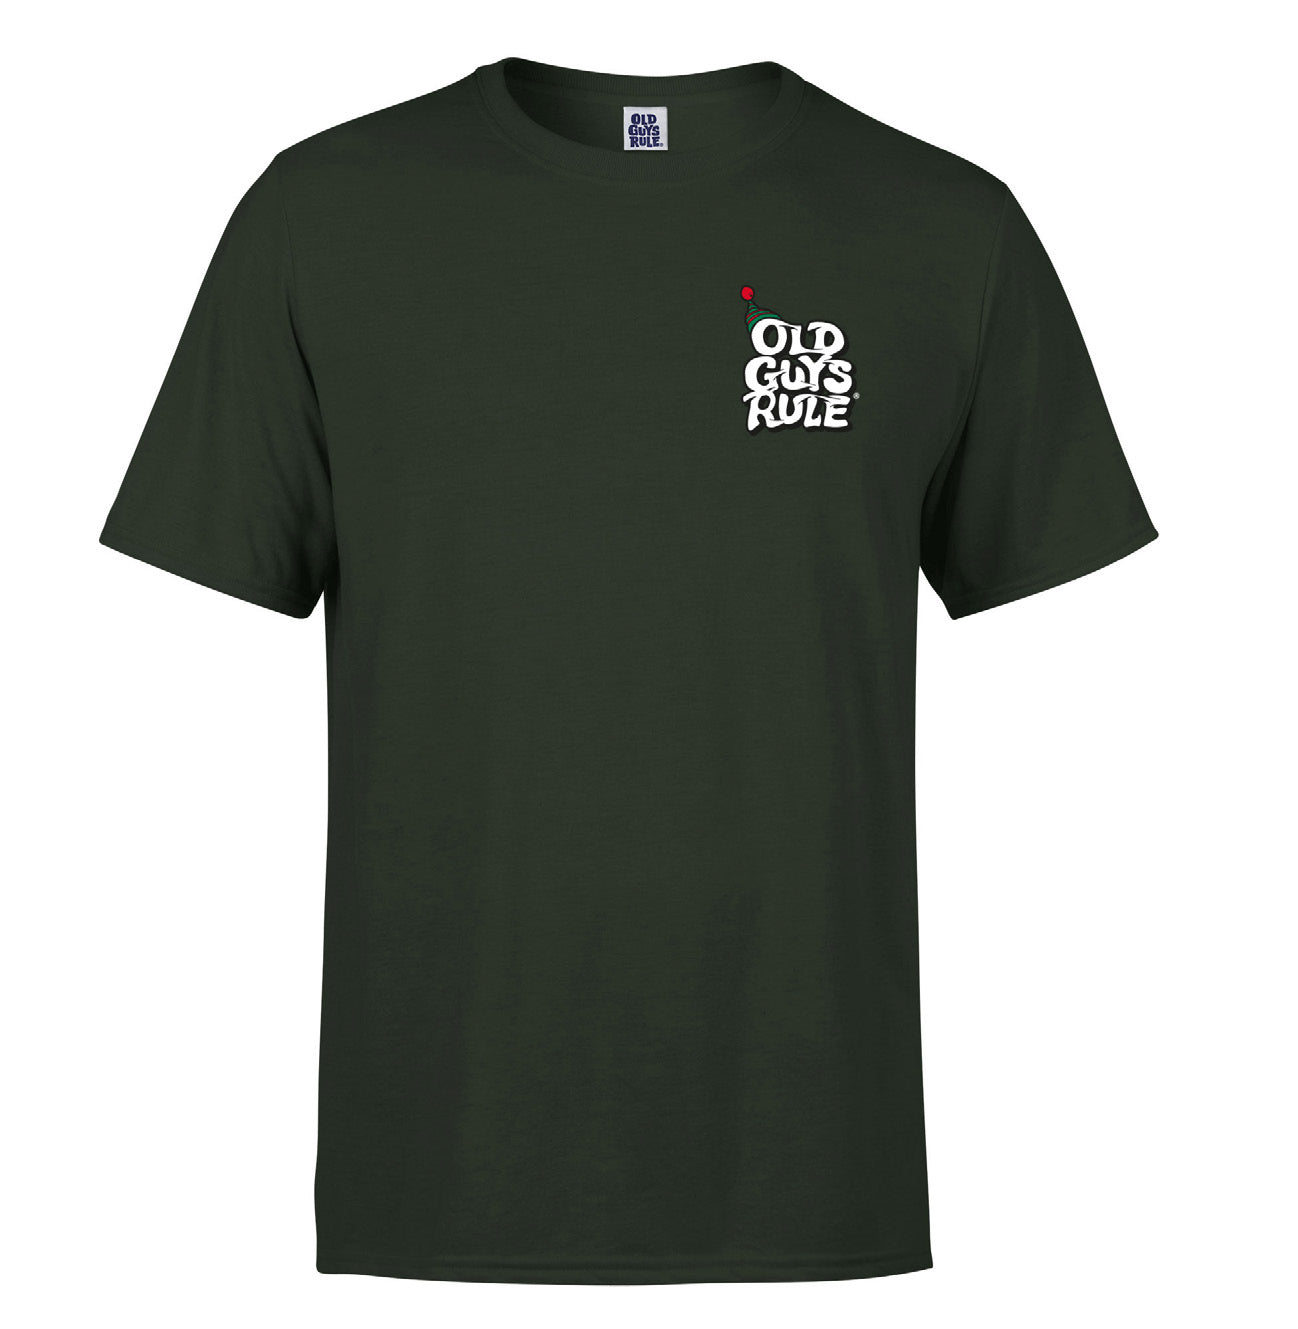 OLD GUYS RULE 'REBEL WITHOUT A CLAUSE' T-SHIRT - *LIMITED EDITION*